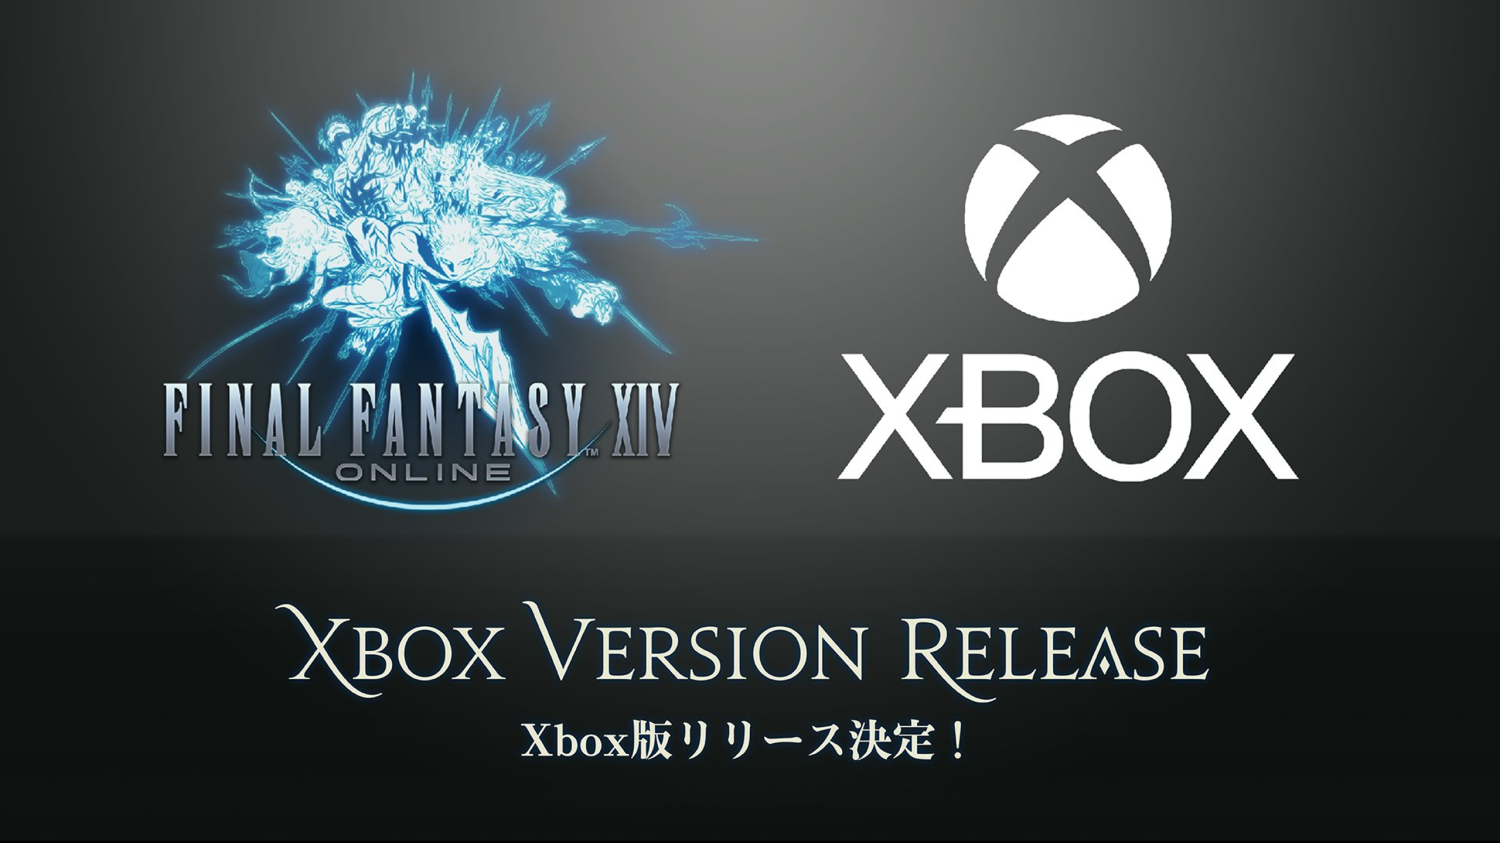 Final Fantasy XIV coming to Xbox with crossplay